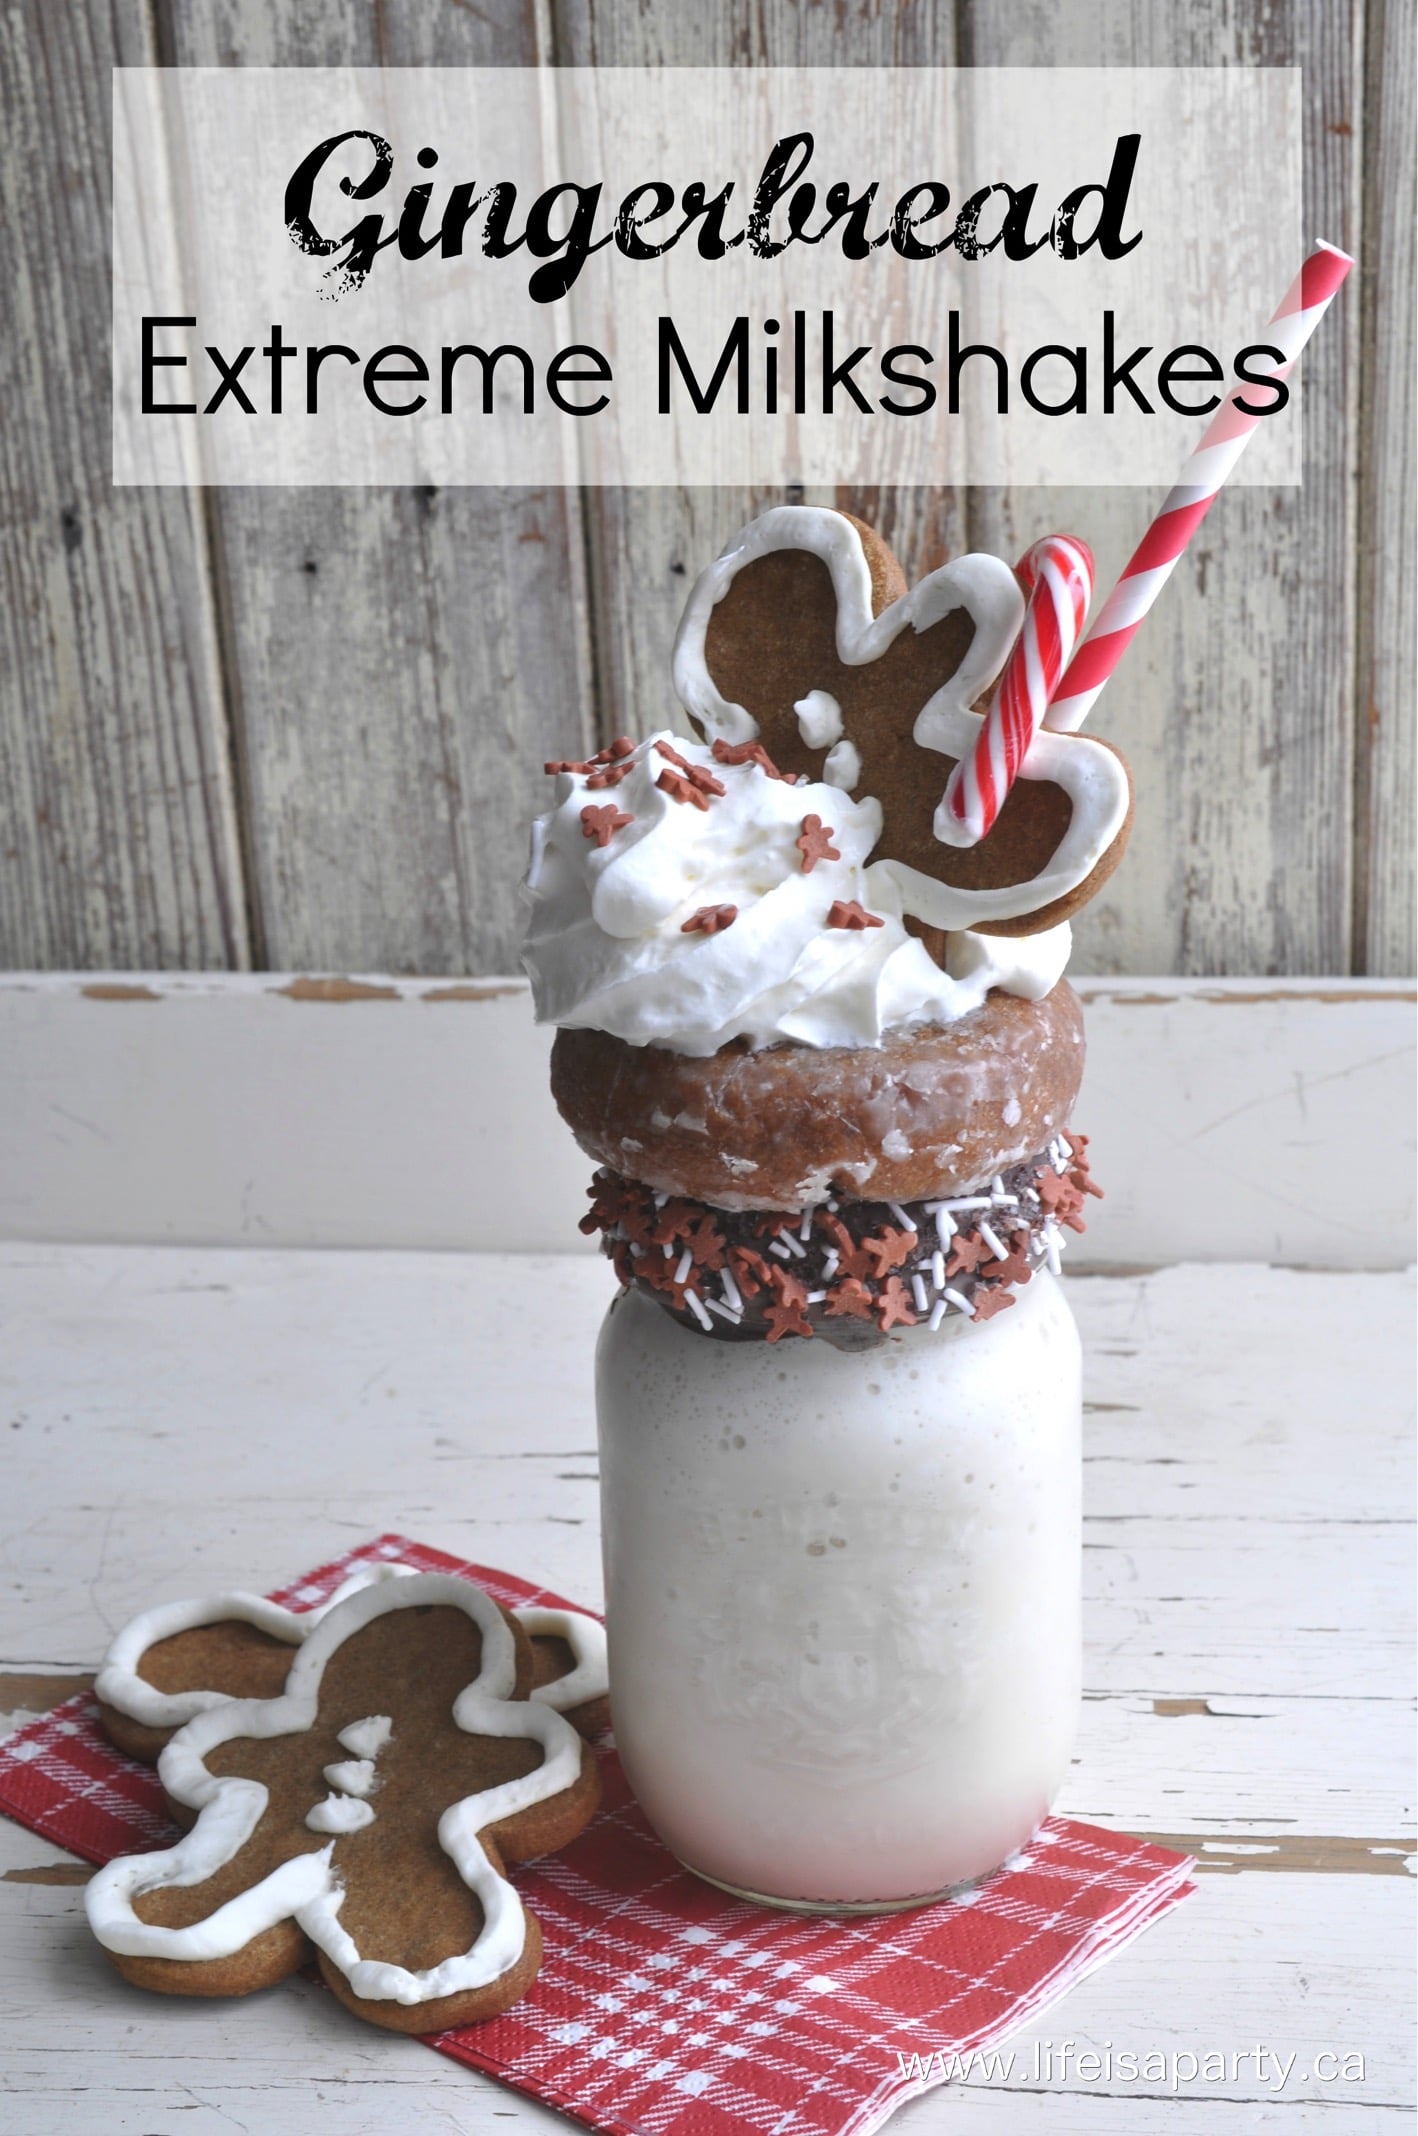 Gingerbread Extreme Milkshakes are the perfect sweet treat for the holidays. Whip up a batch of gingerbread syrup and make these amazing shakes.